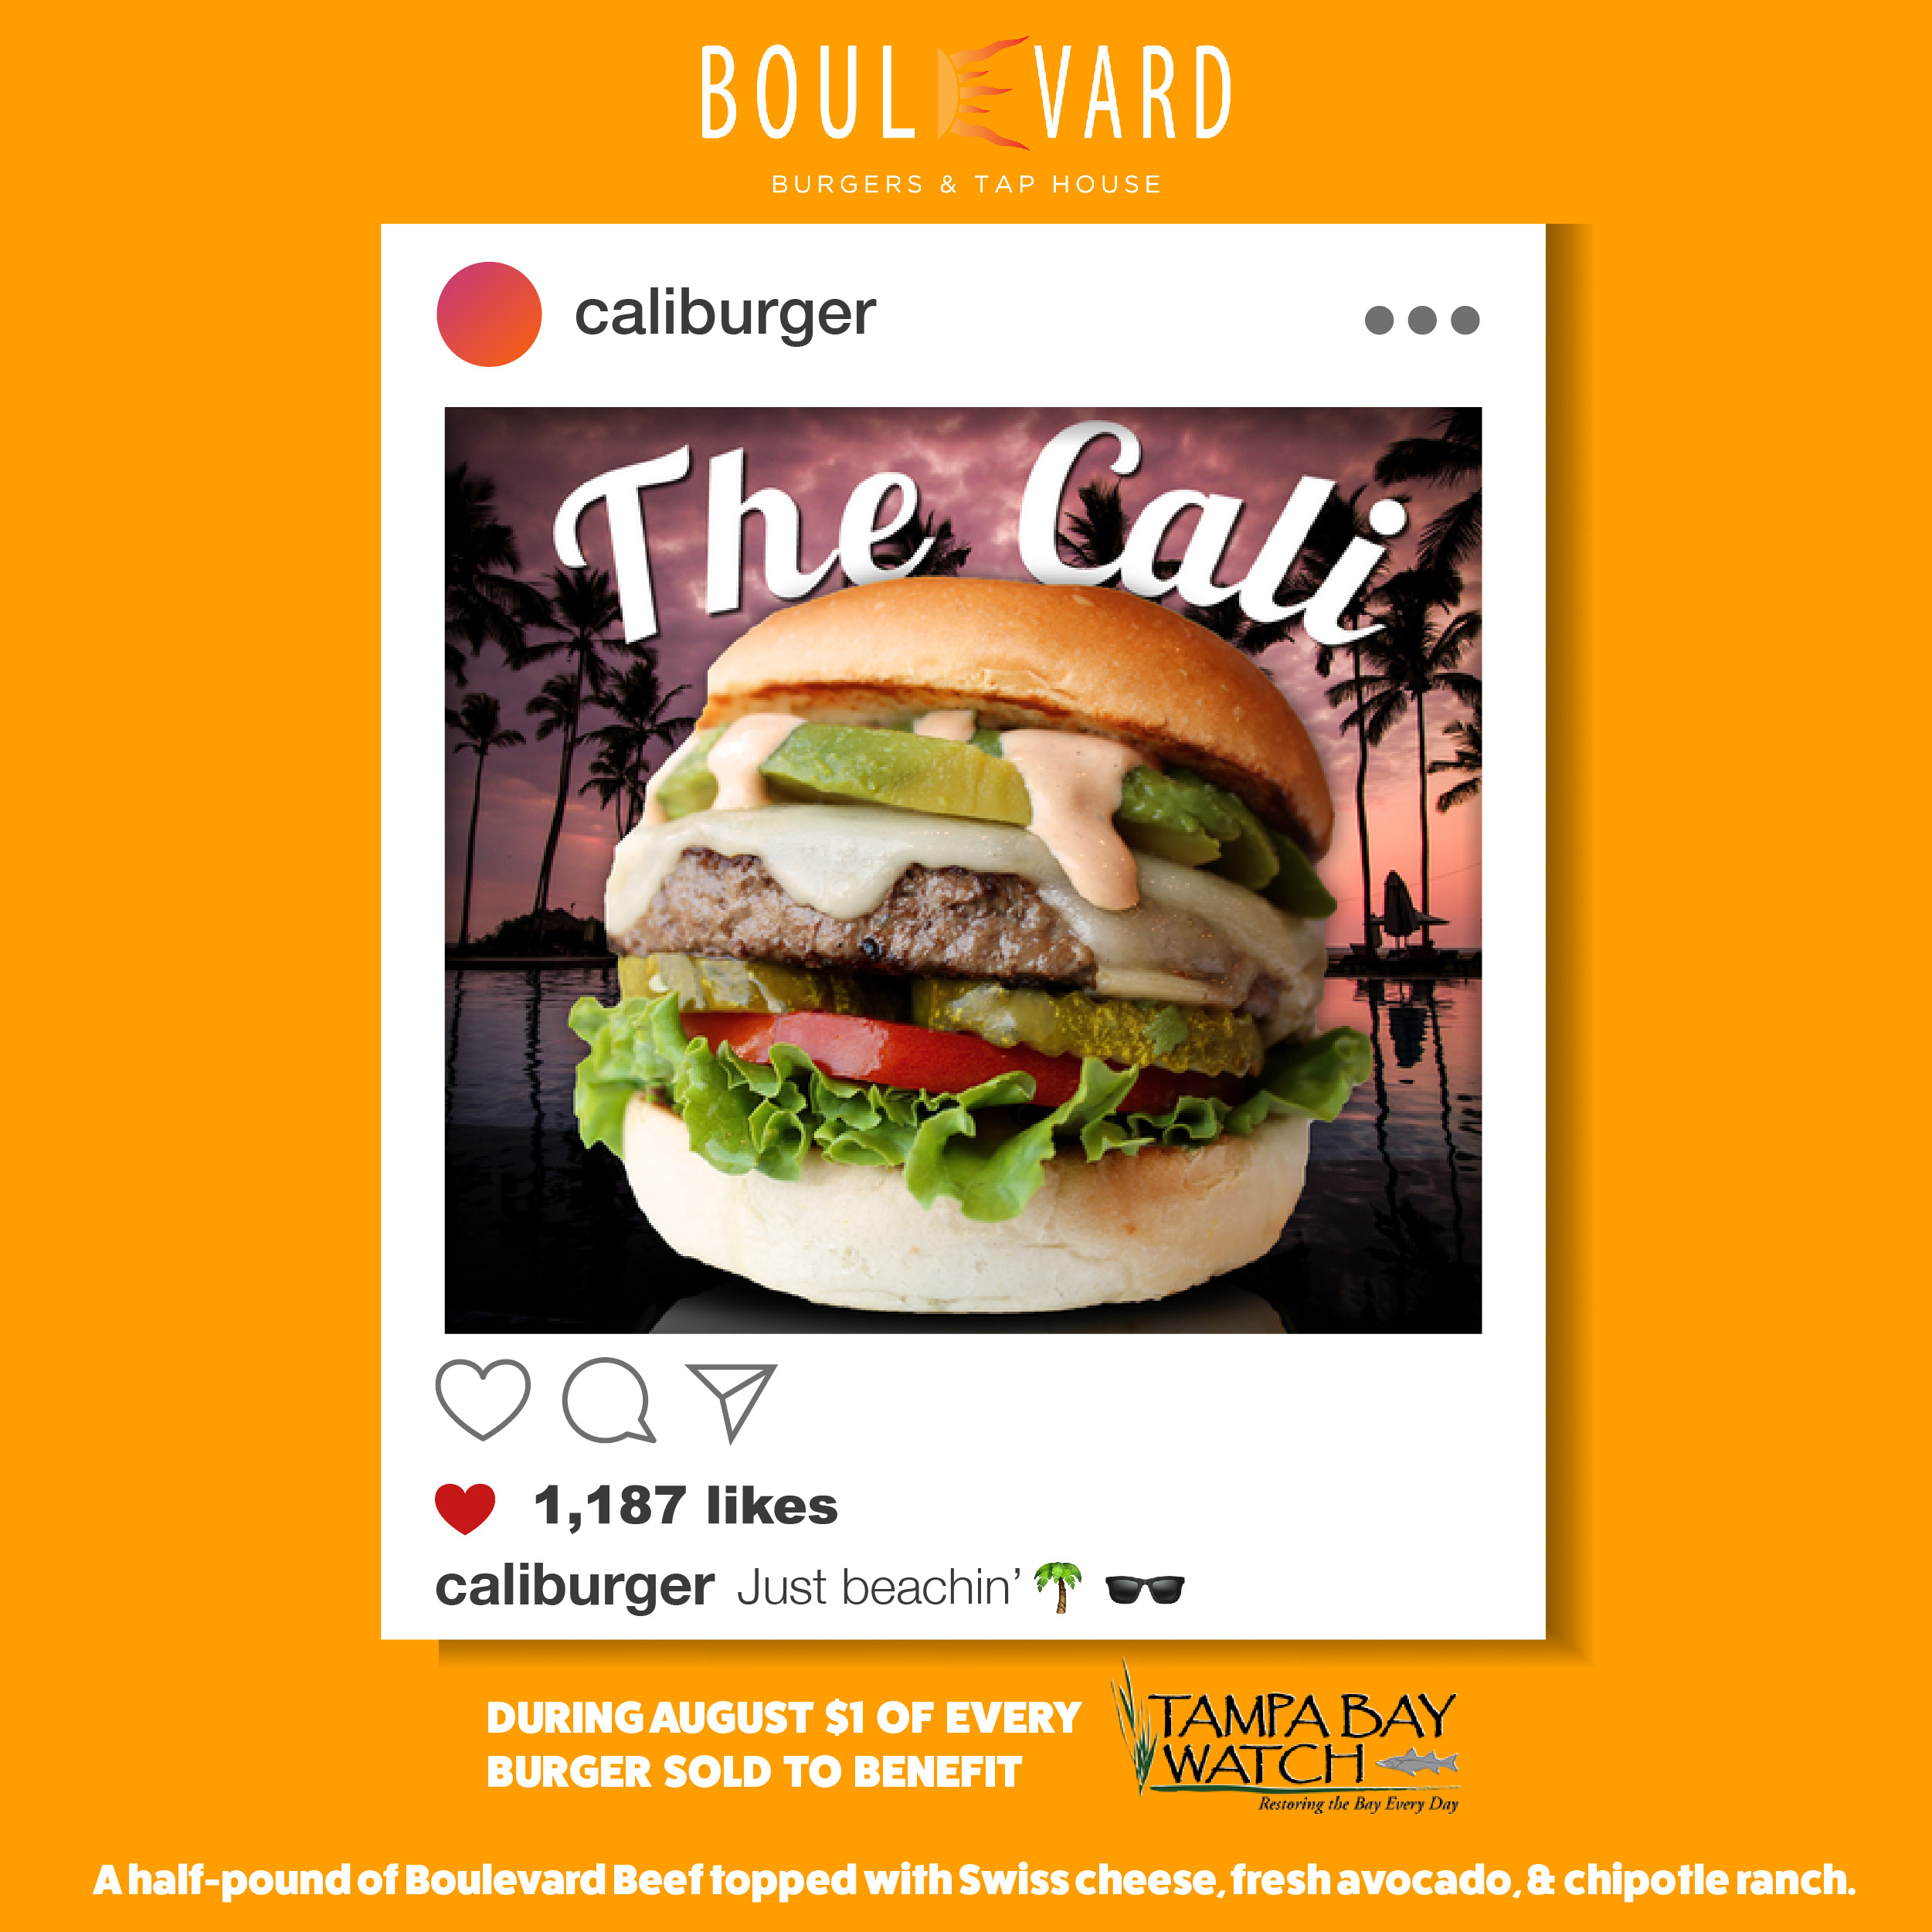 Boulevard Burgers & Tap House Partners with Tampa Bay Watch